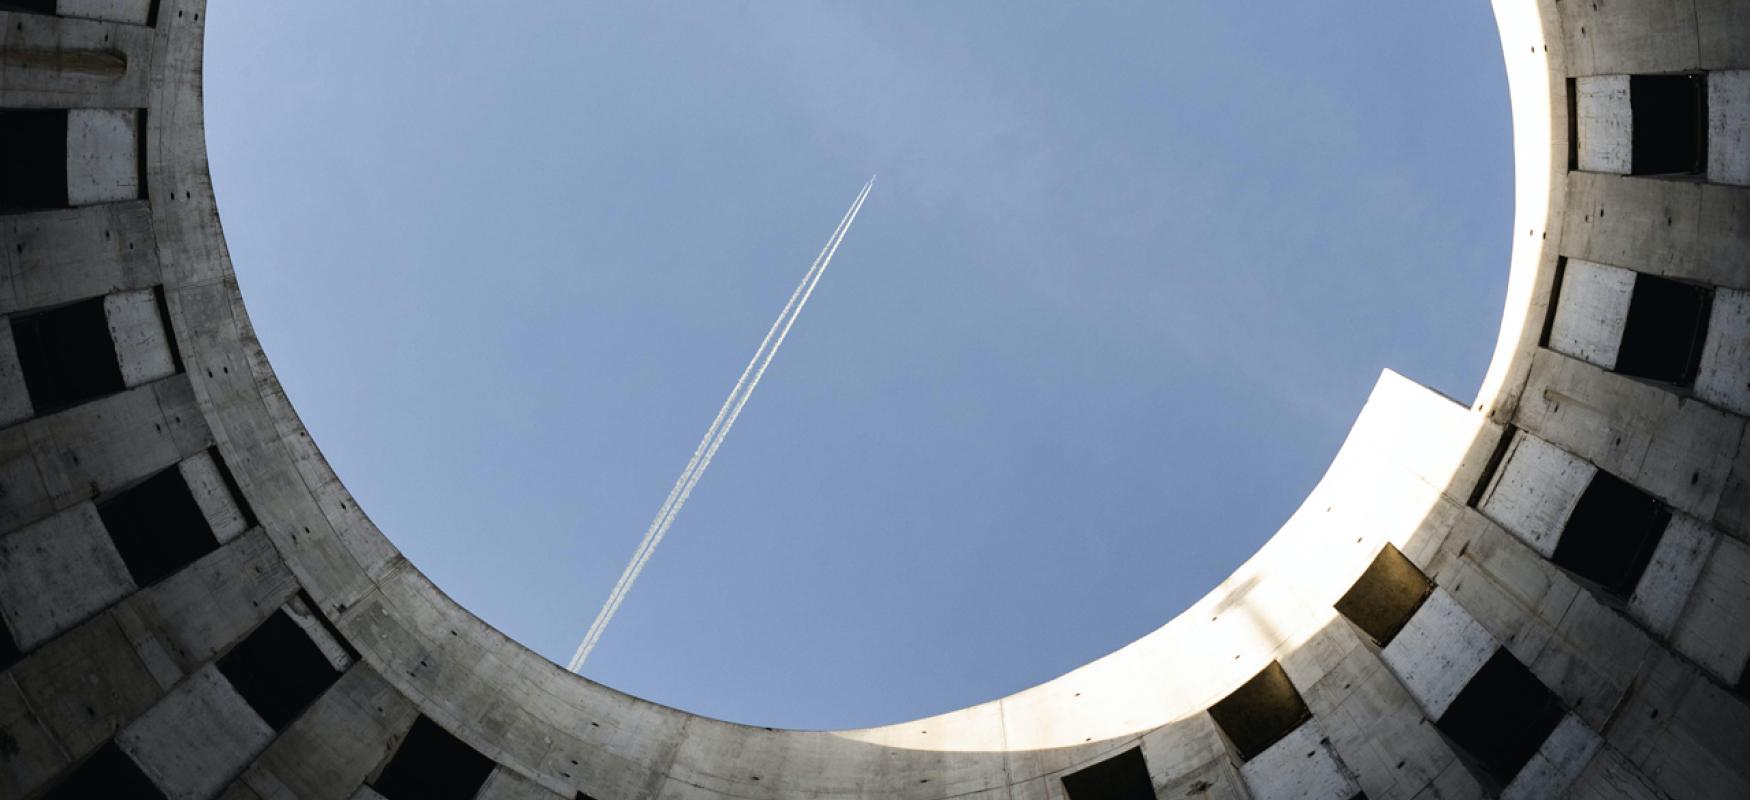  photography taken stright upward of brown concrete building under blue sky and a plane. Photo by Ben Krb on Unsplash